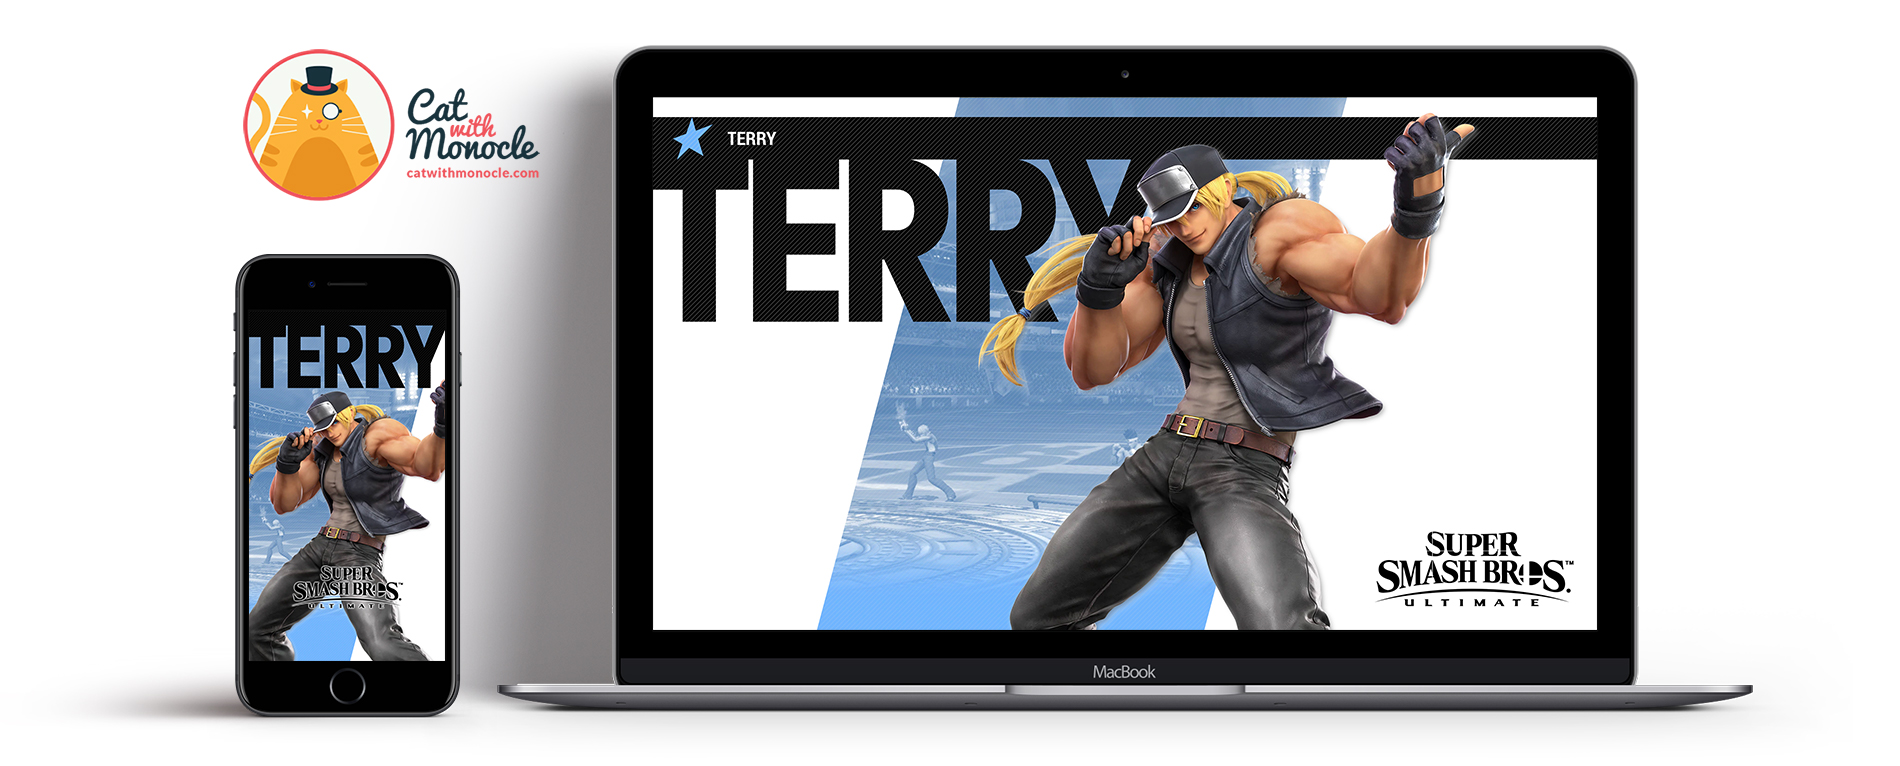 Super Smash Bros Ultimate Terry Wallpapers Costume 7